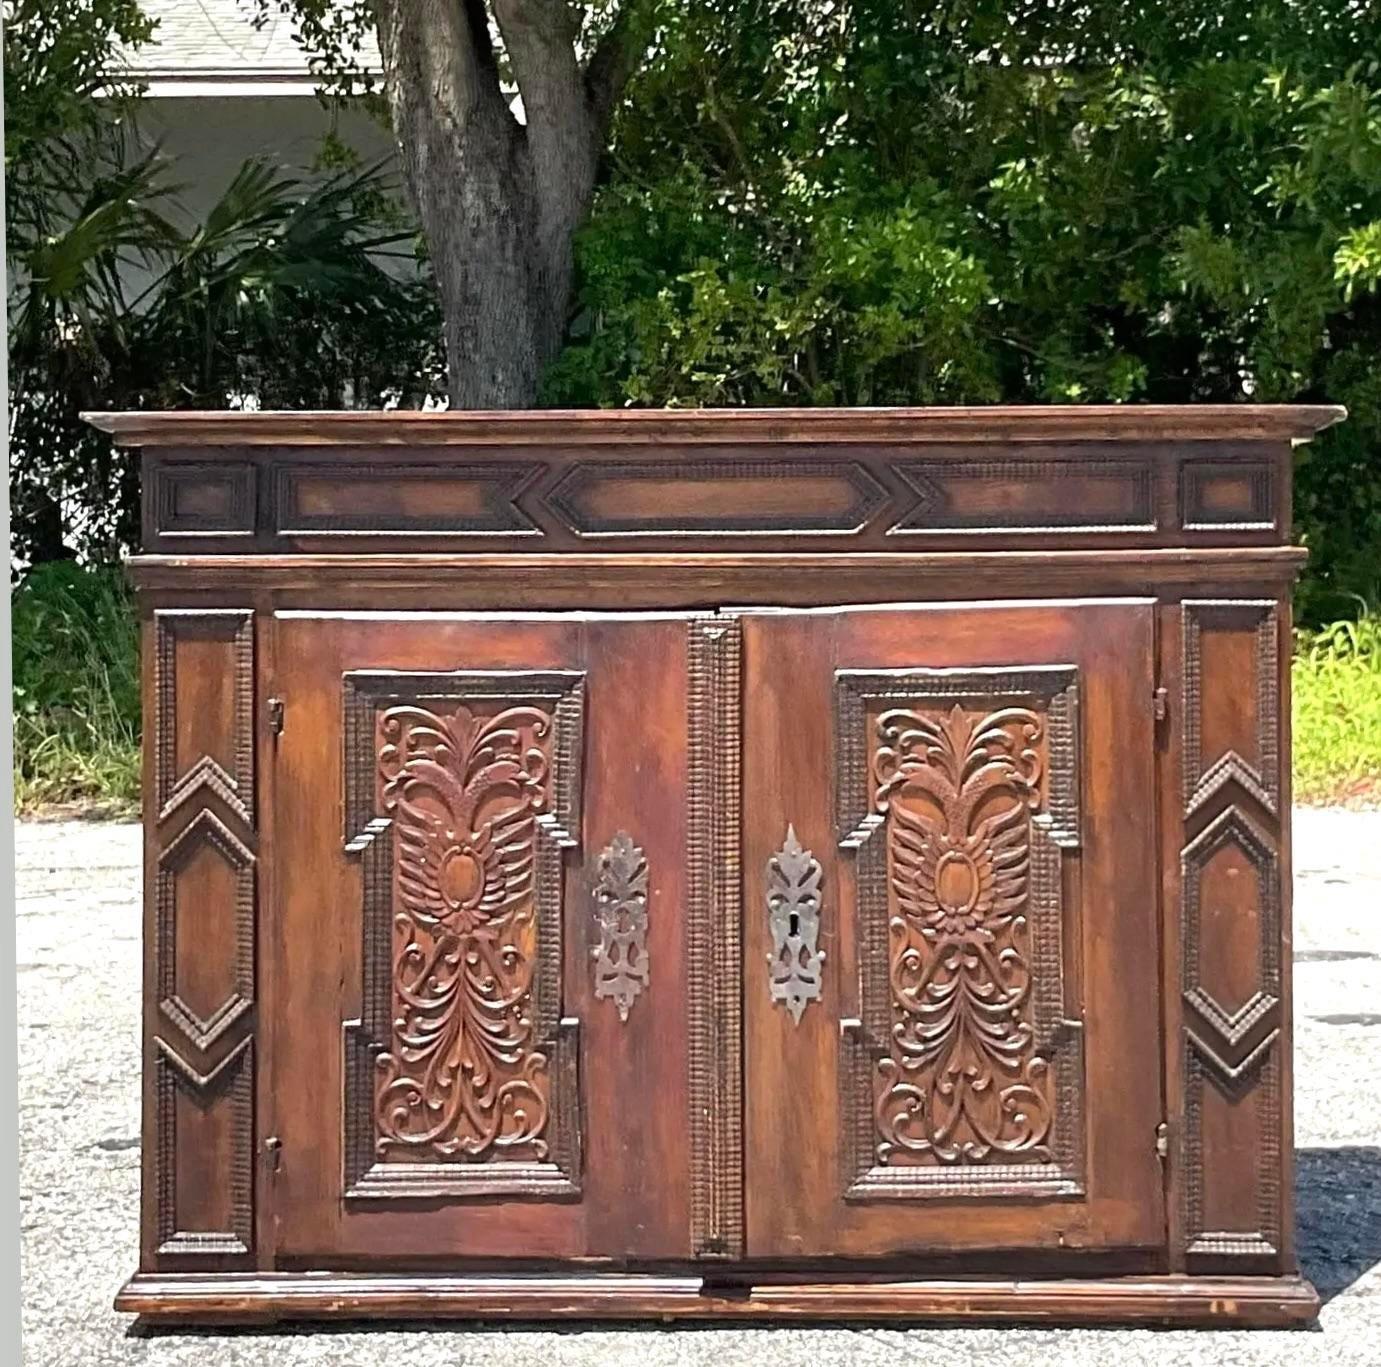 Colonial Charm: The Antique 18th Century Carved Primitive Sideboard is a testament to American craftsmanship and heritage. With its intricate carvings and rustic allure, it embodies the simplicity and warmth of early American design. A piece of